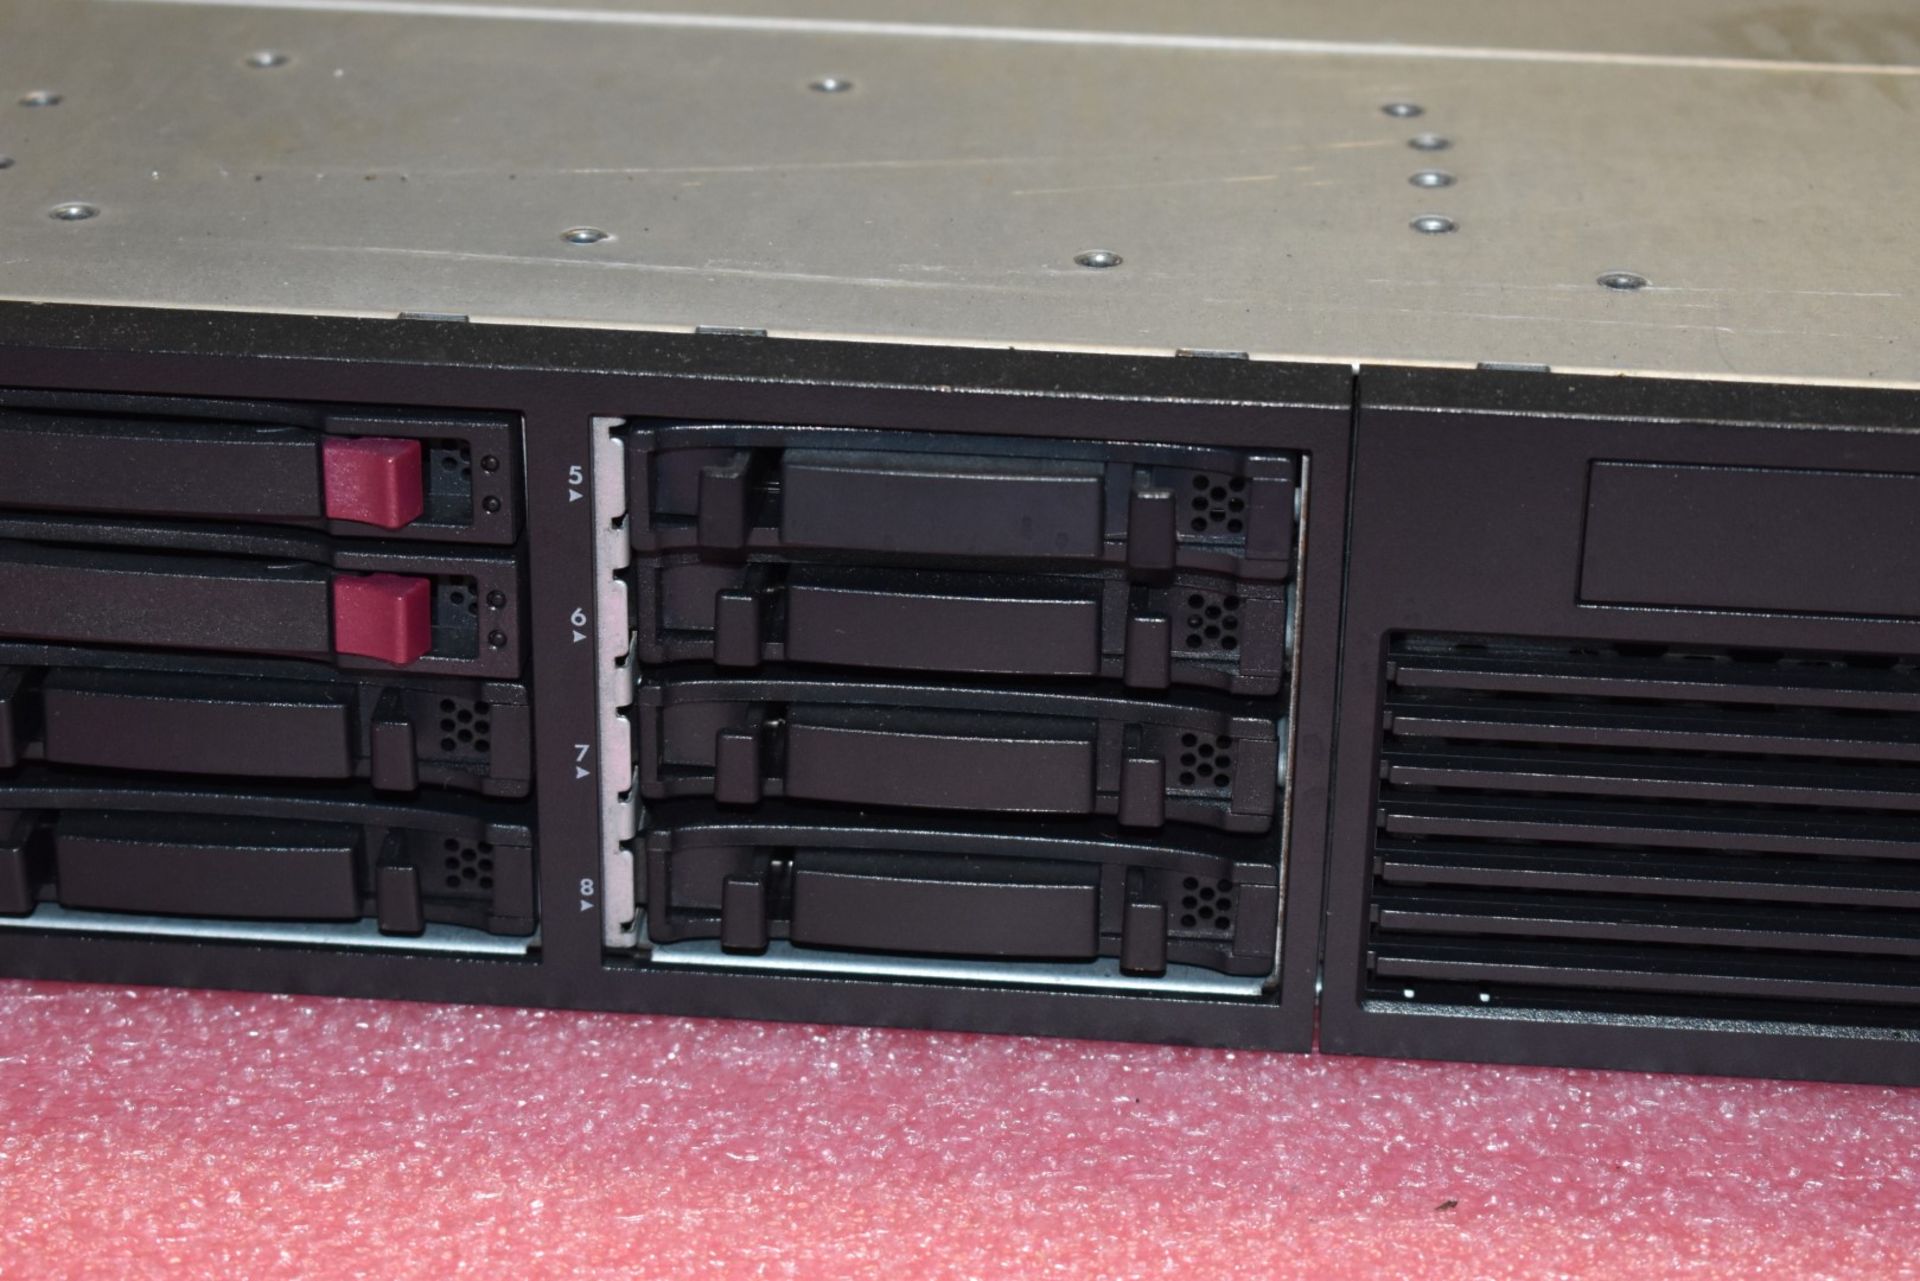 1 x HP ProLiant DL380 G7 Server With 2 x Intel Xeon X5650 Six Core 3.06ghz Processors and 92gb Ram - - Image 8 of 8